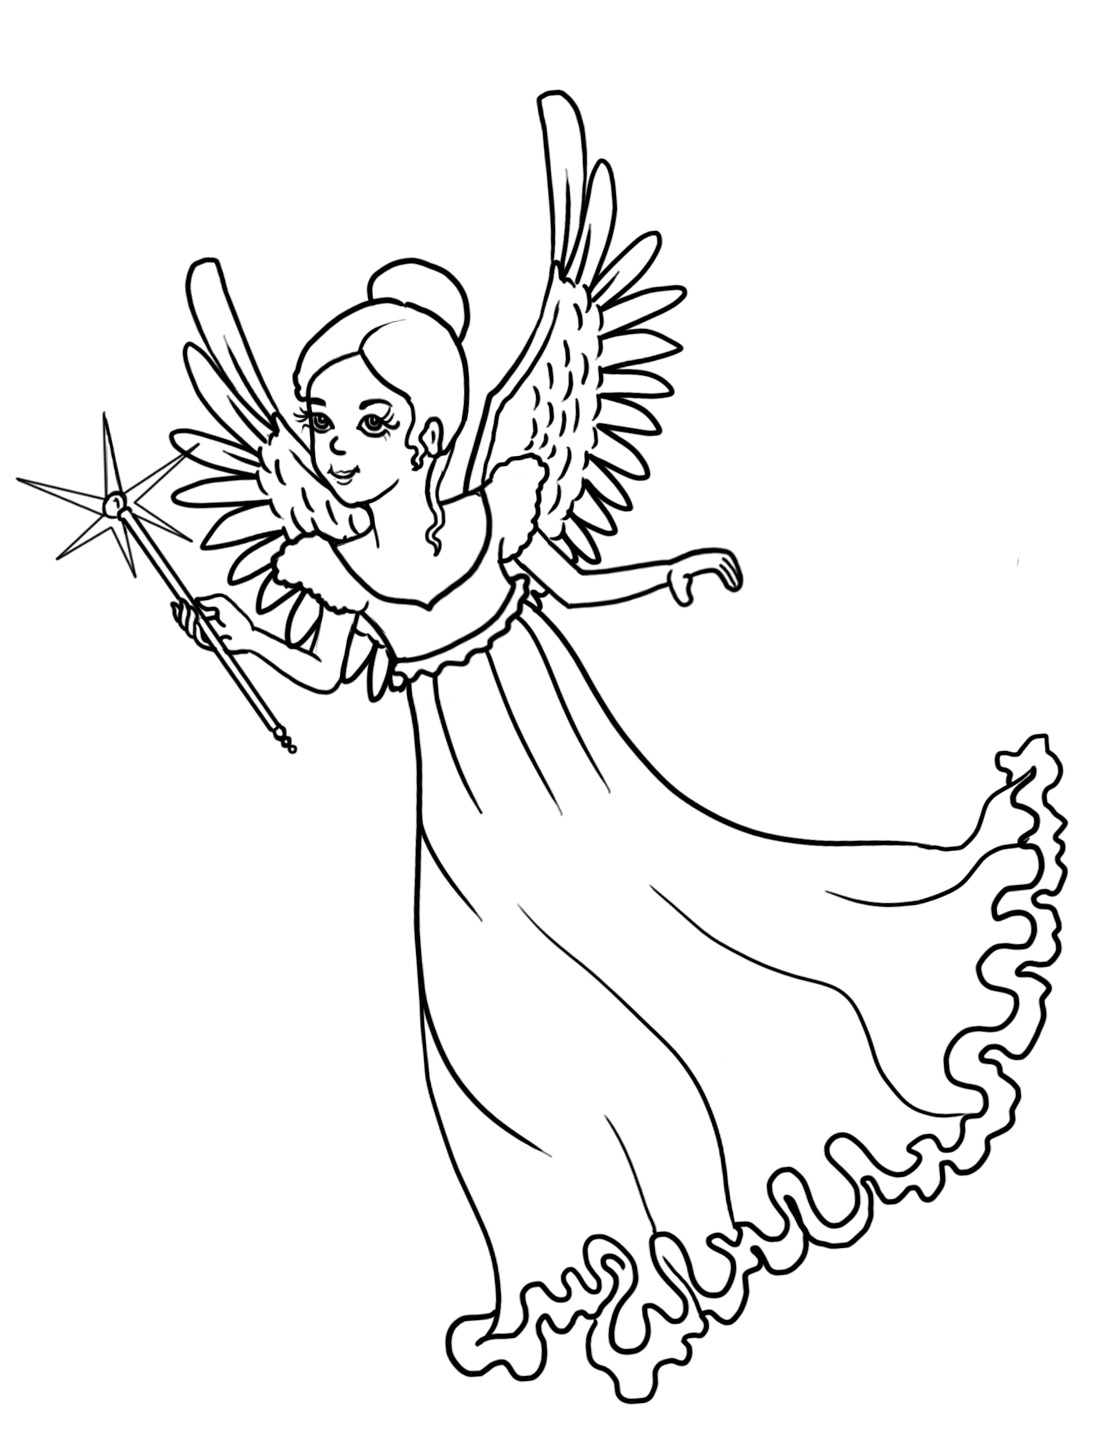 Tinker Angel Coloring Pages